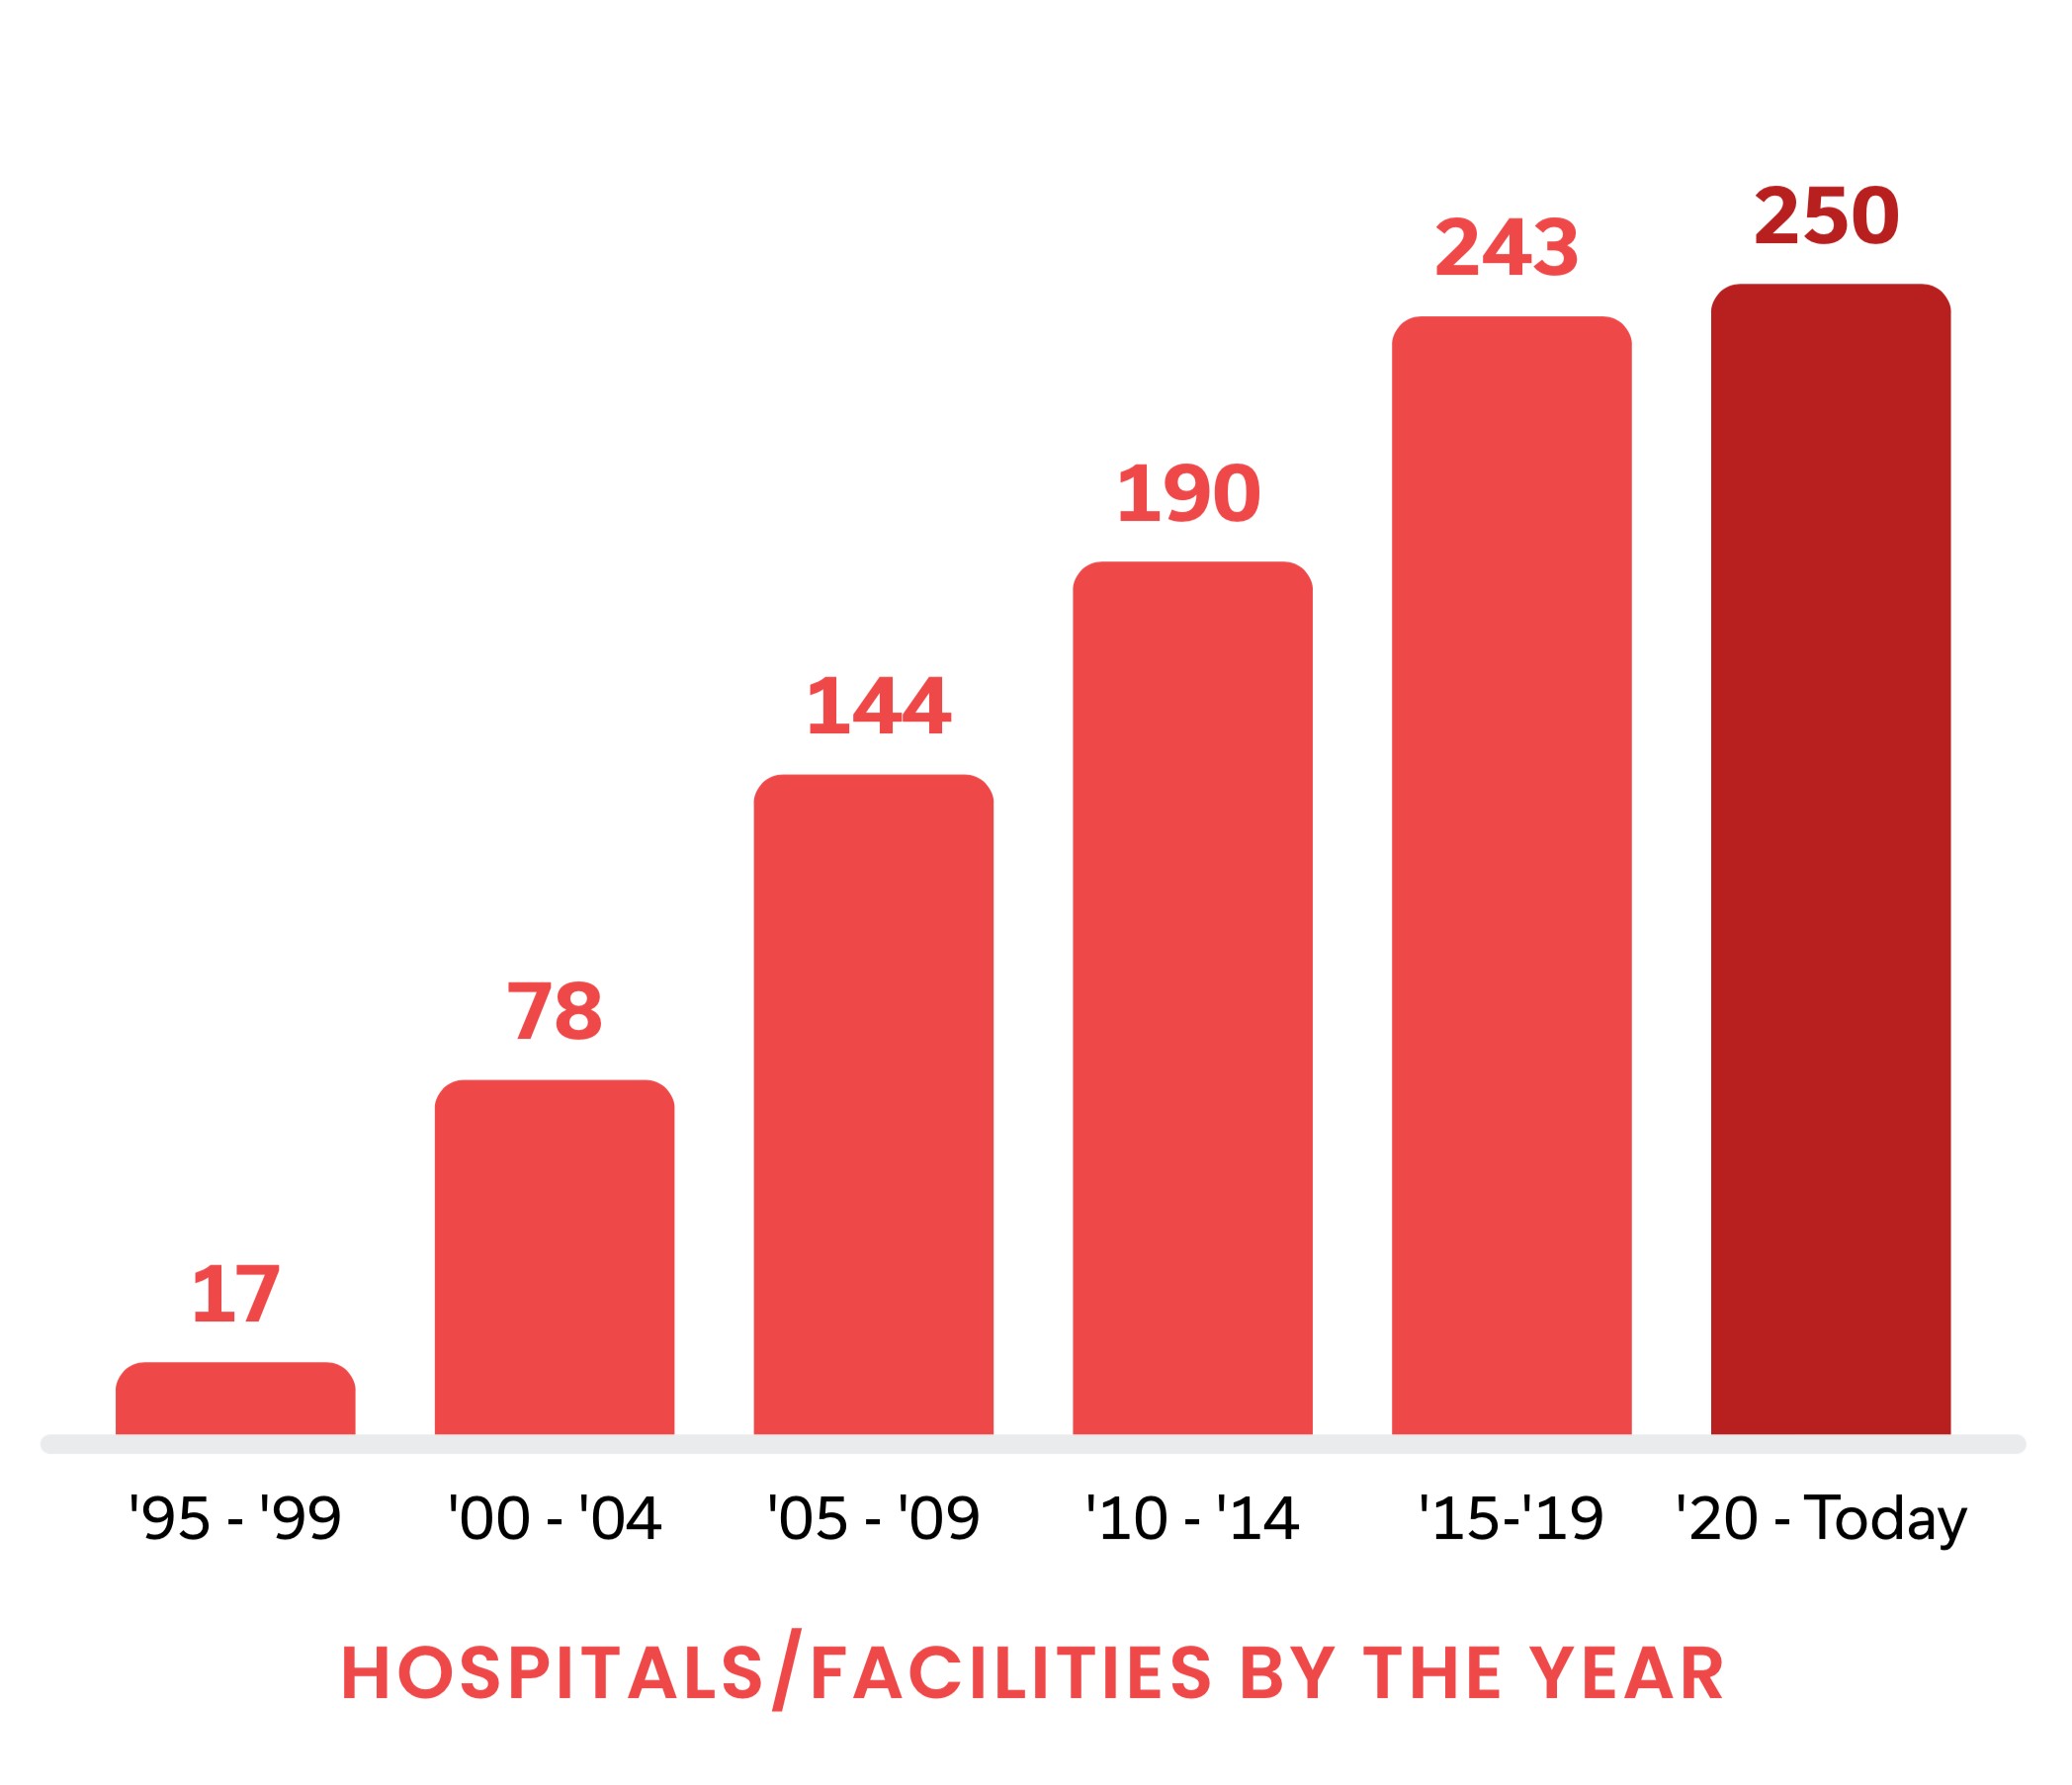 Hospital Facilities by the year